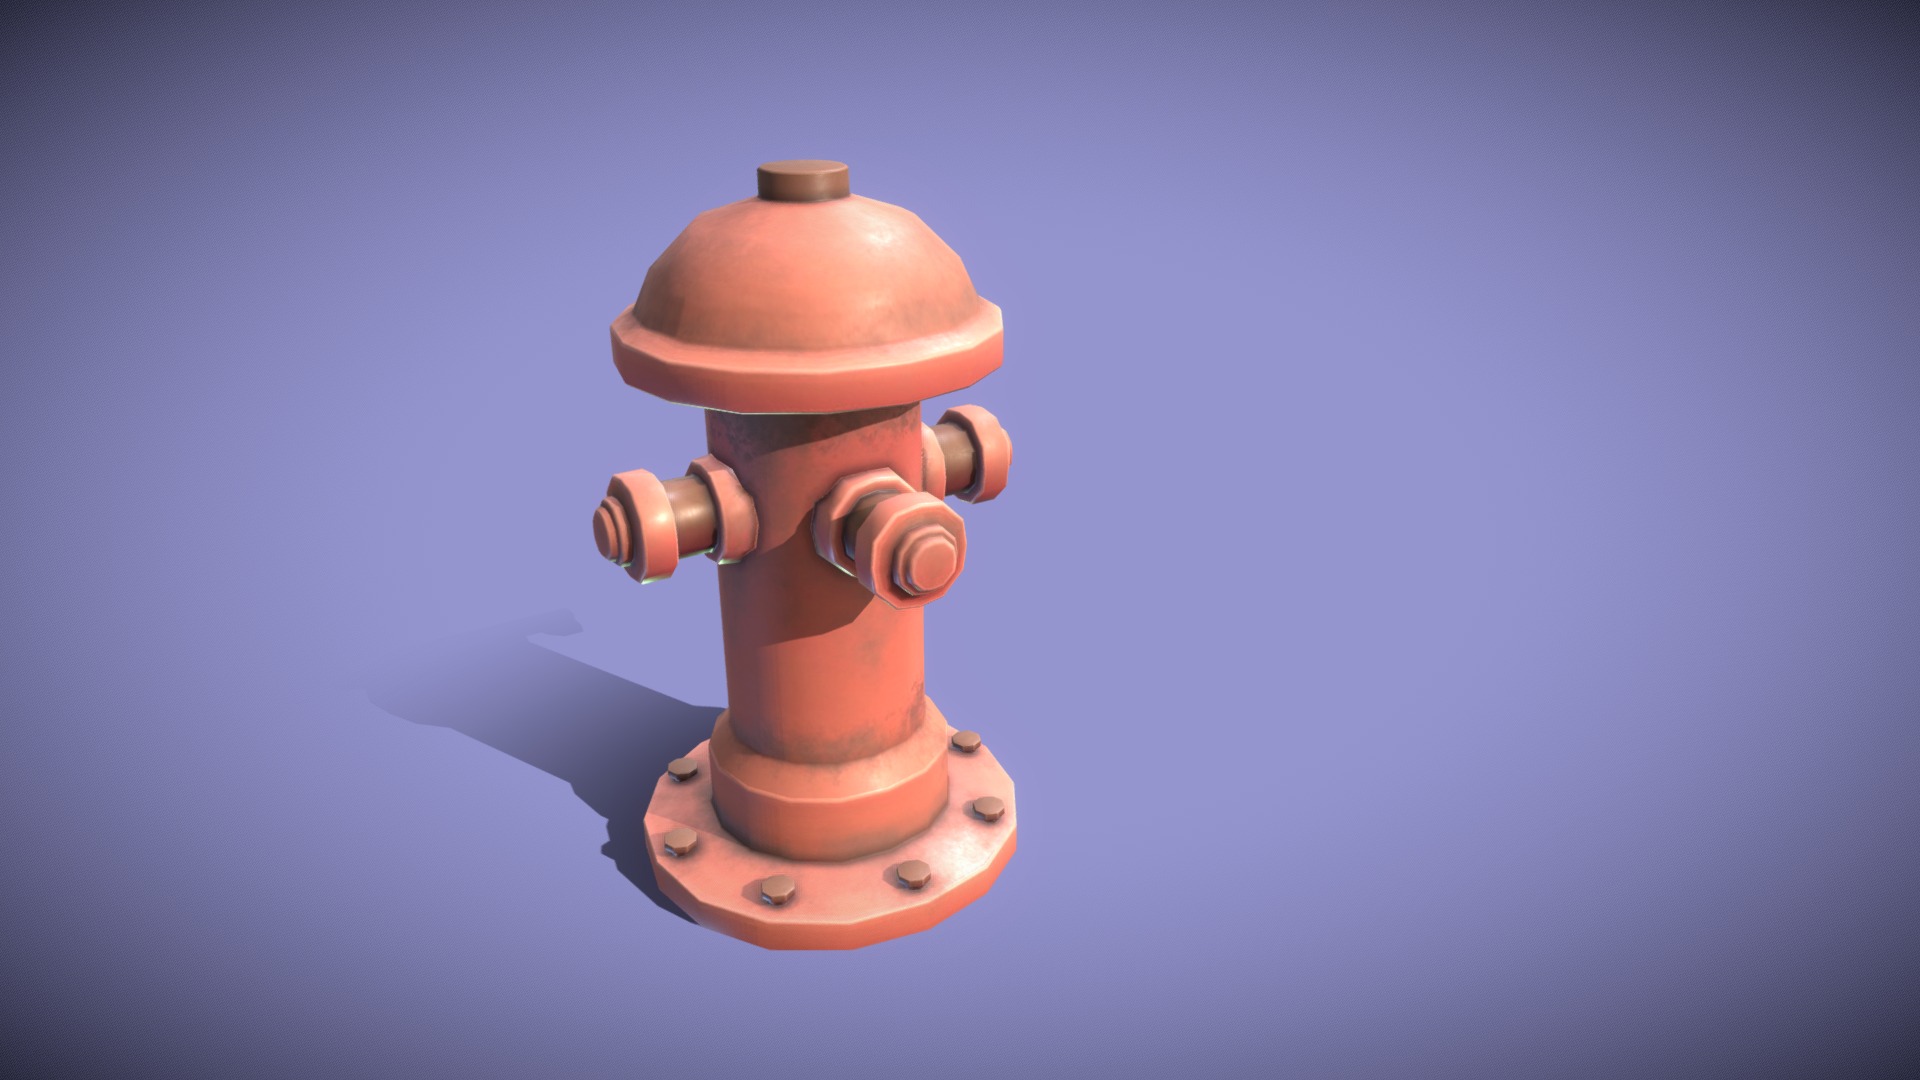 3D model Fire hydrant low poly game ready - This is a 3D model of the Fire hydrant low poly game ready. The 3D model is about a red and white fire hydrant.